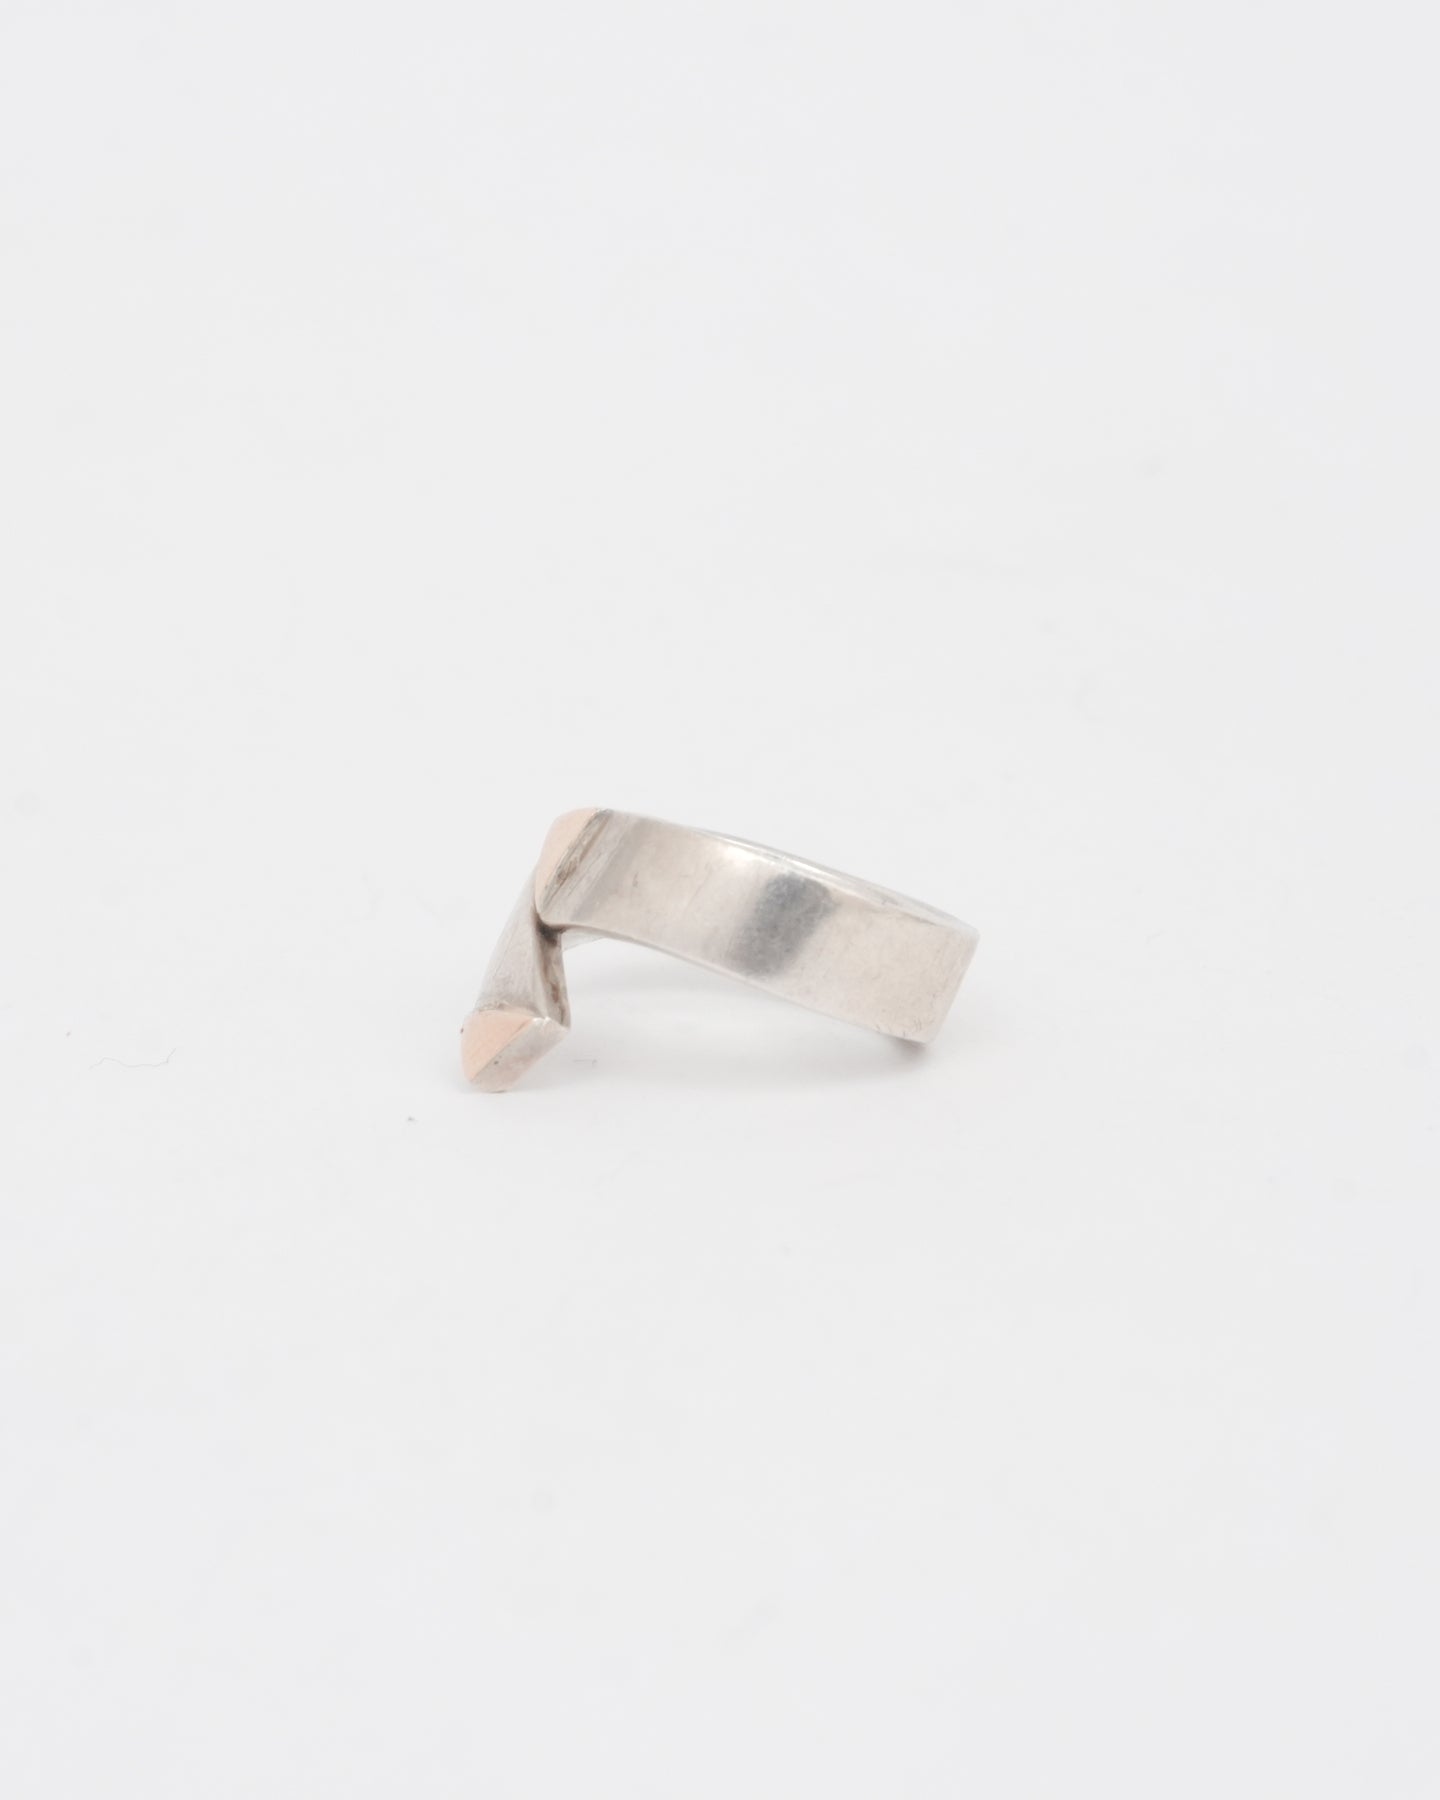 Silver Ring: Size8